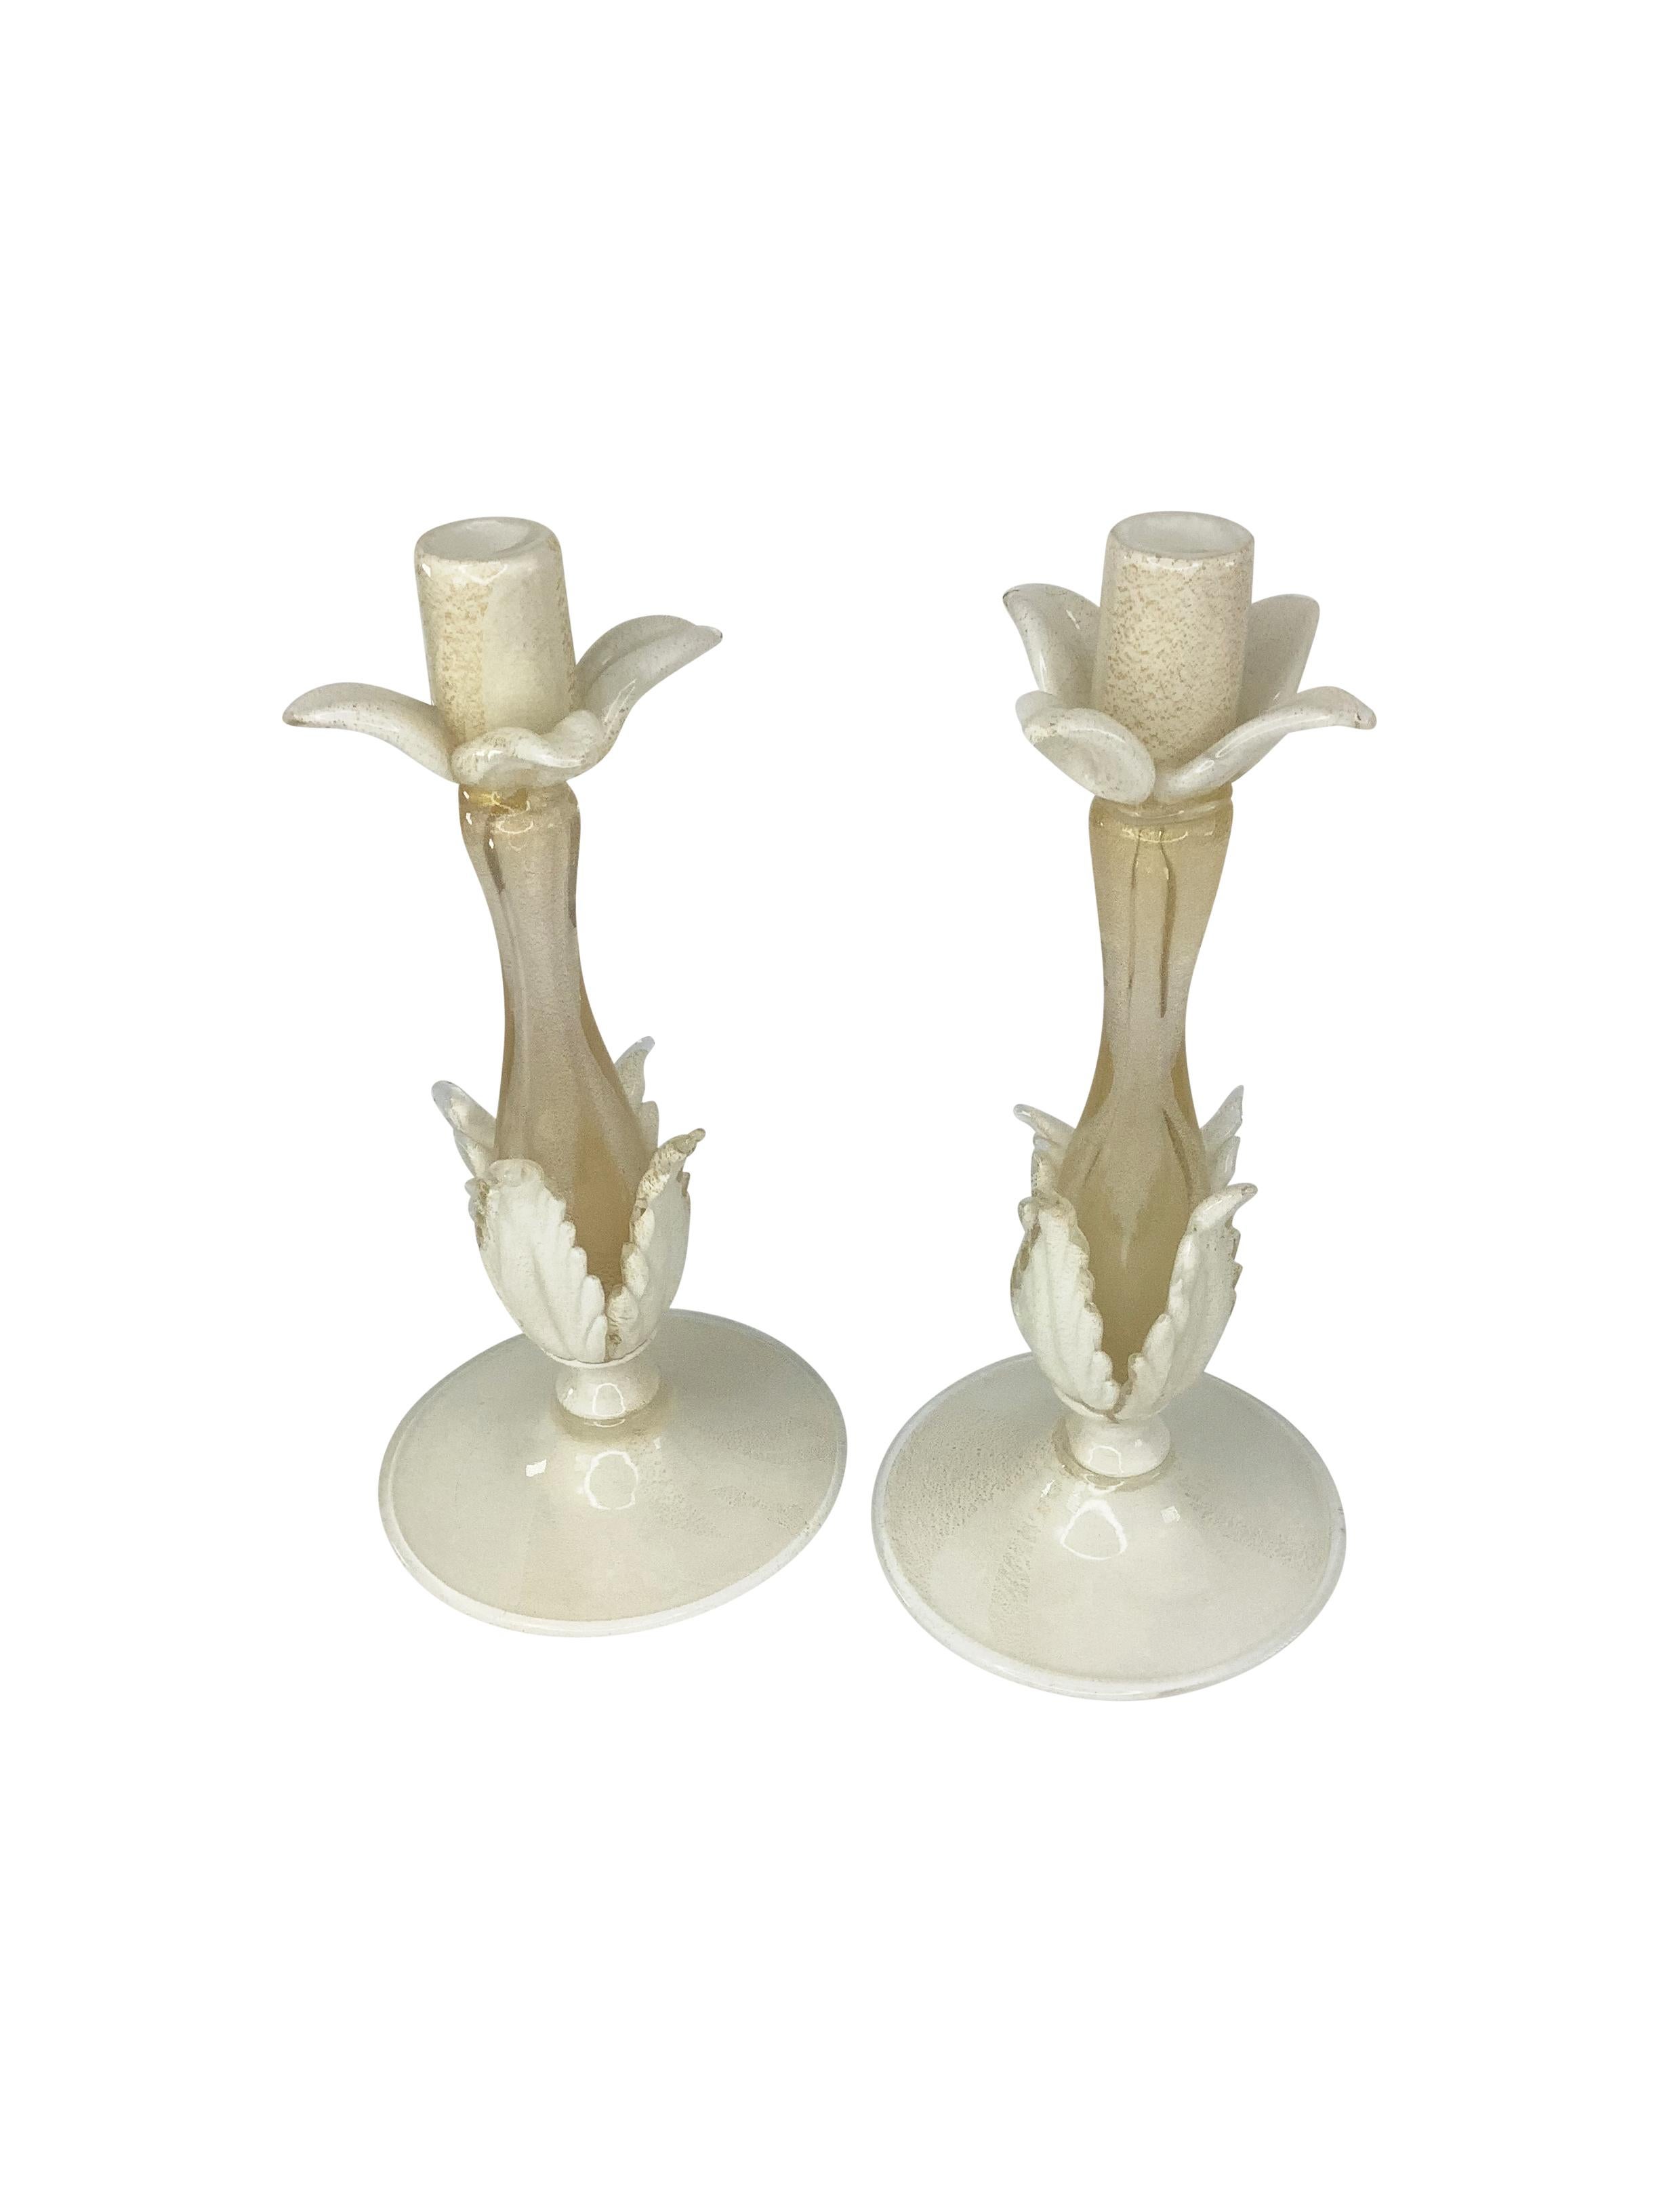 Rare pair of petal-form white and gold Candlesticks attributed to Barovier & Toso Murano Glass. The white foot accented with gold flake issuing a petal form gold stem.
